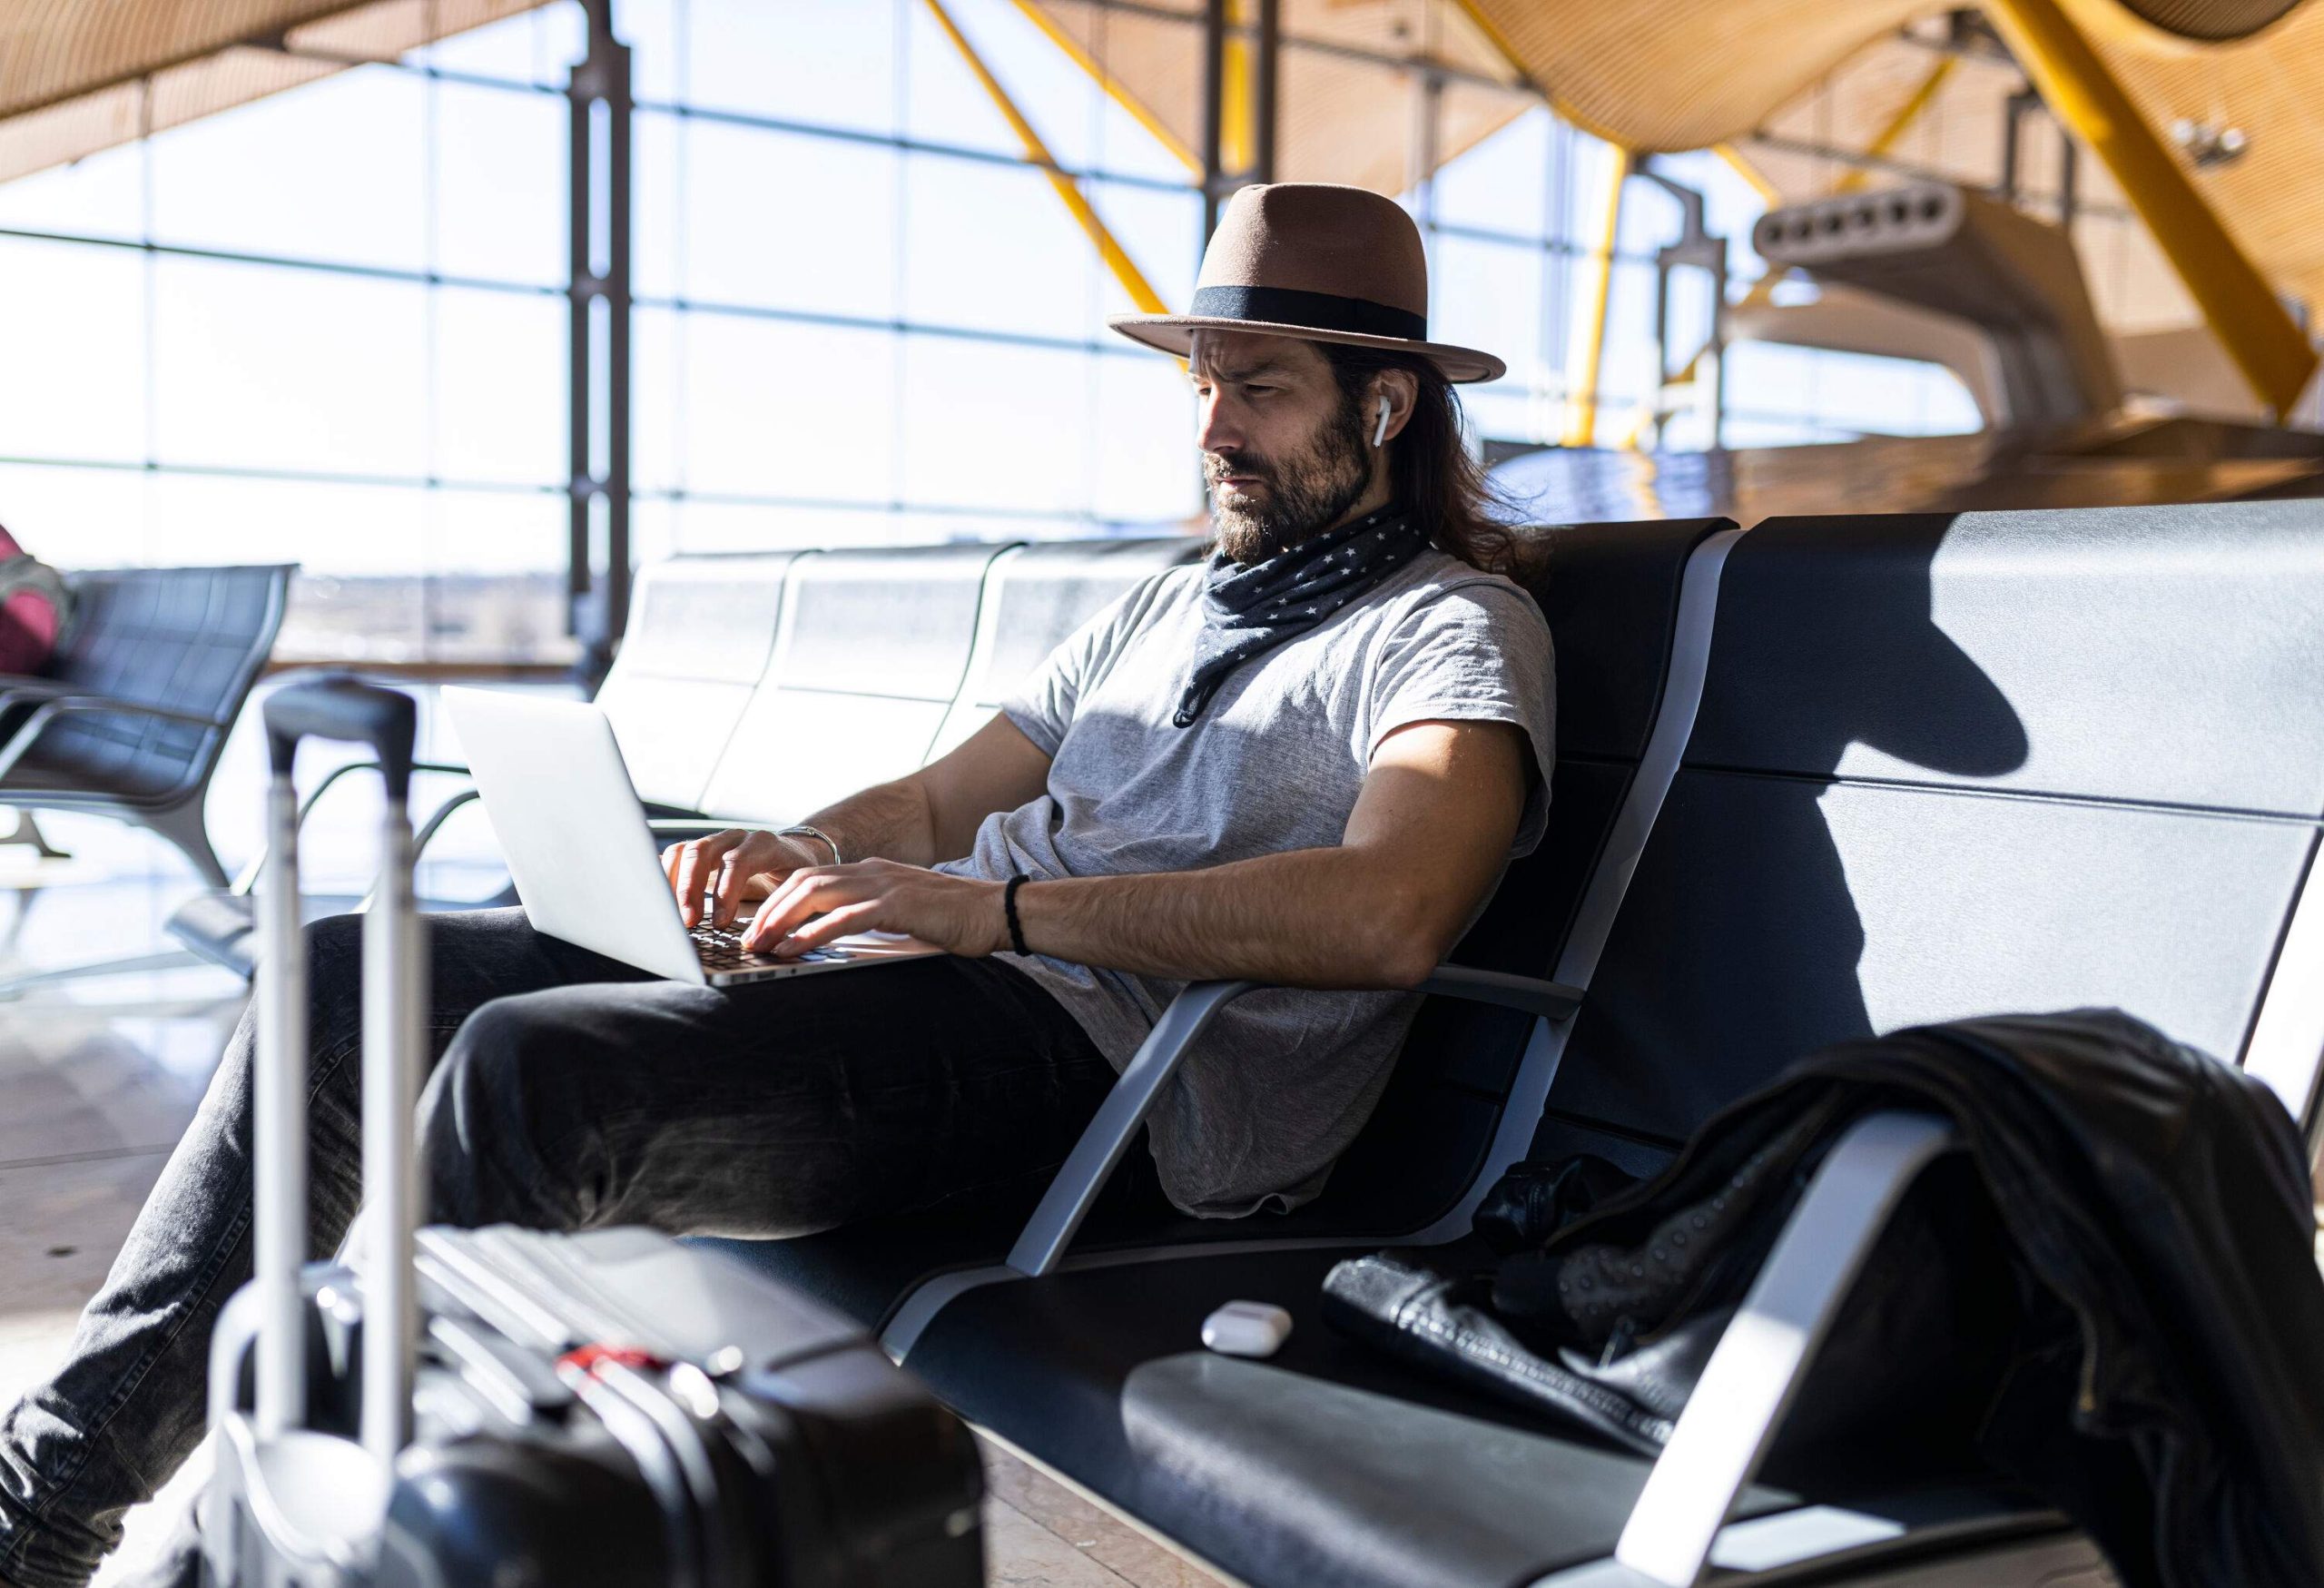 A man with a fedora hat and wireless earphones working on his laptop while slouched on one of the seats in a terminal.